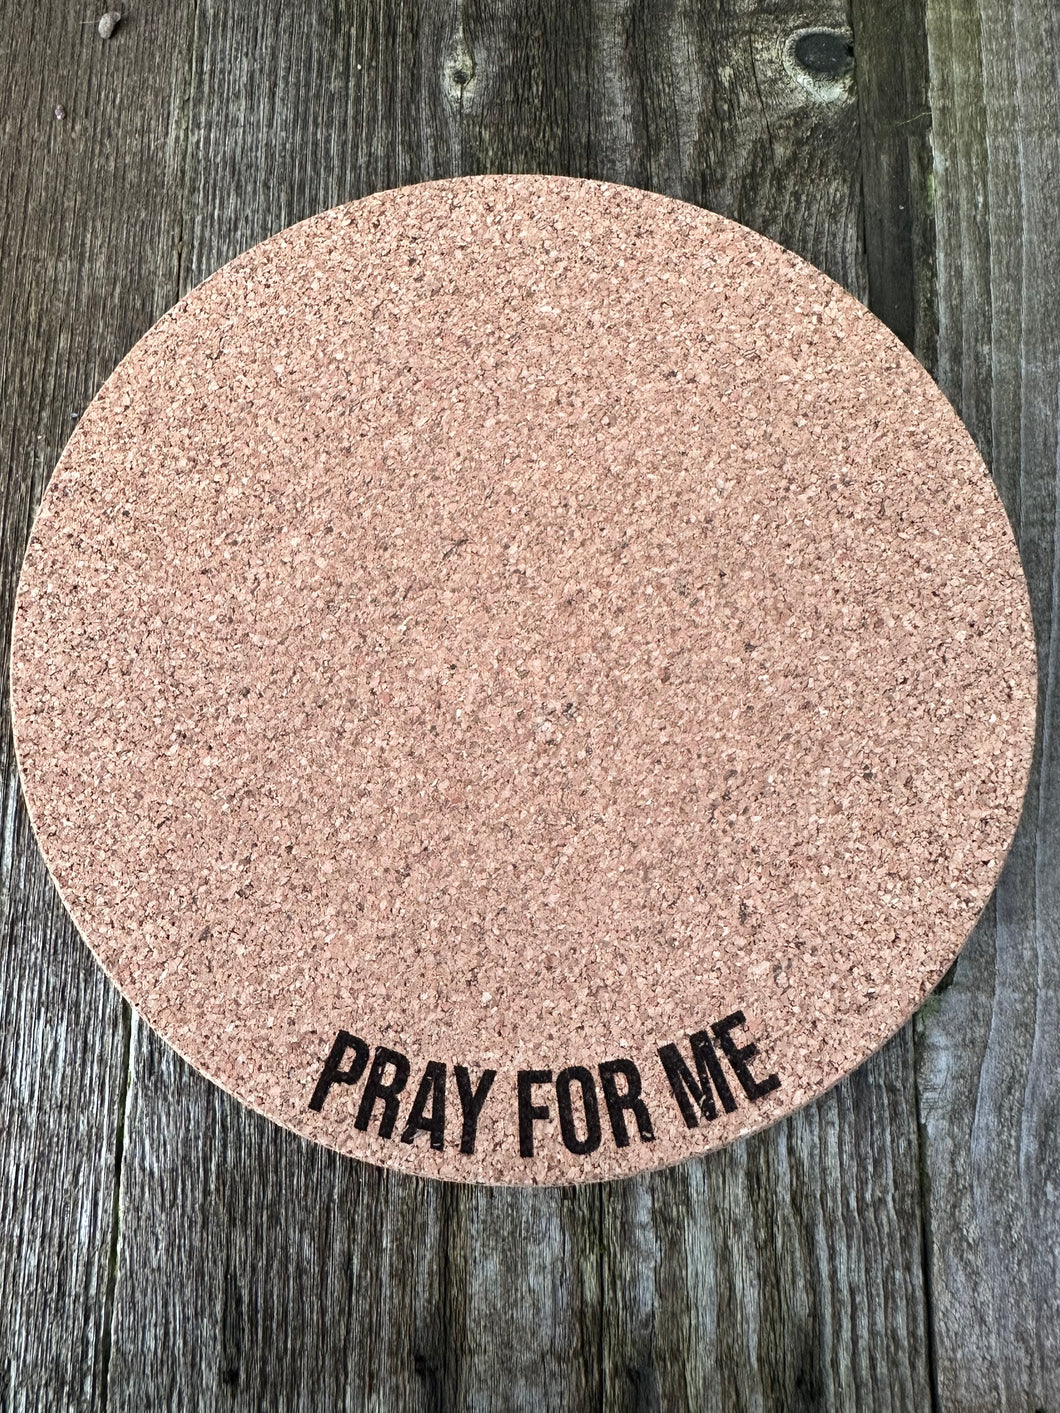 Pray For Me Cork Plant Mat - Engraved Cork Round - Cork Bottom - No Plastic or Rubber - All Natural Material